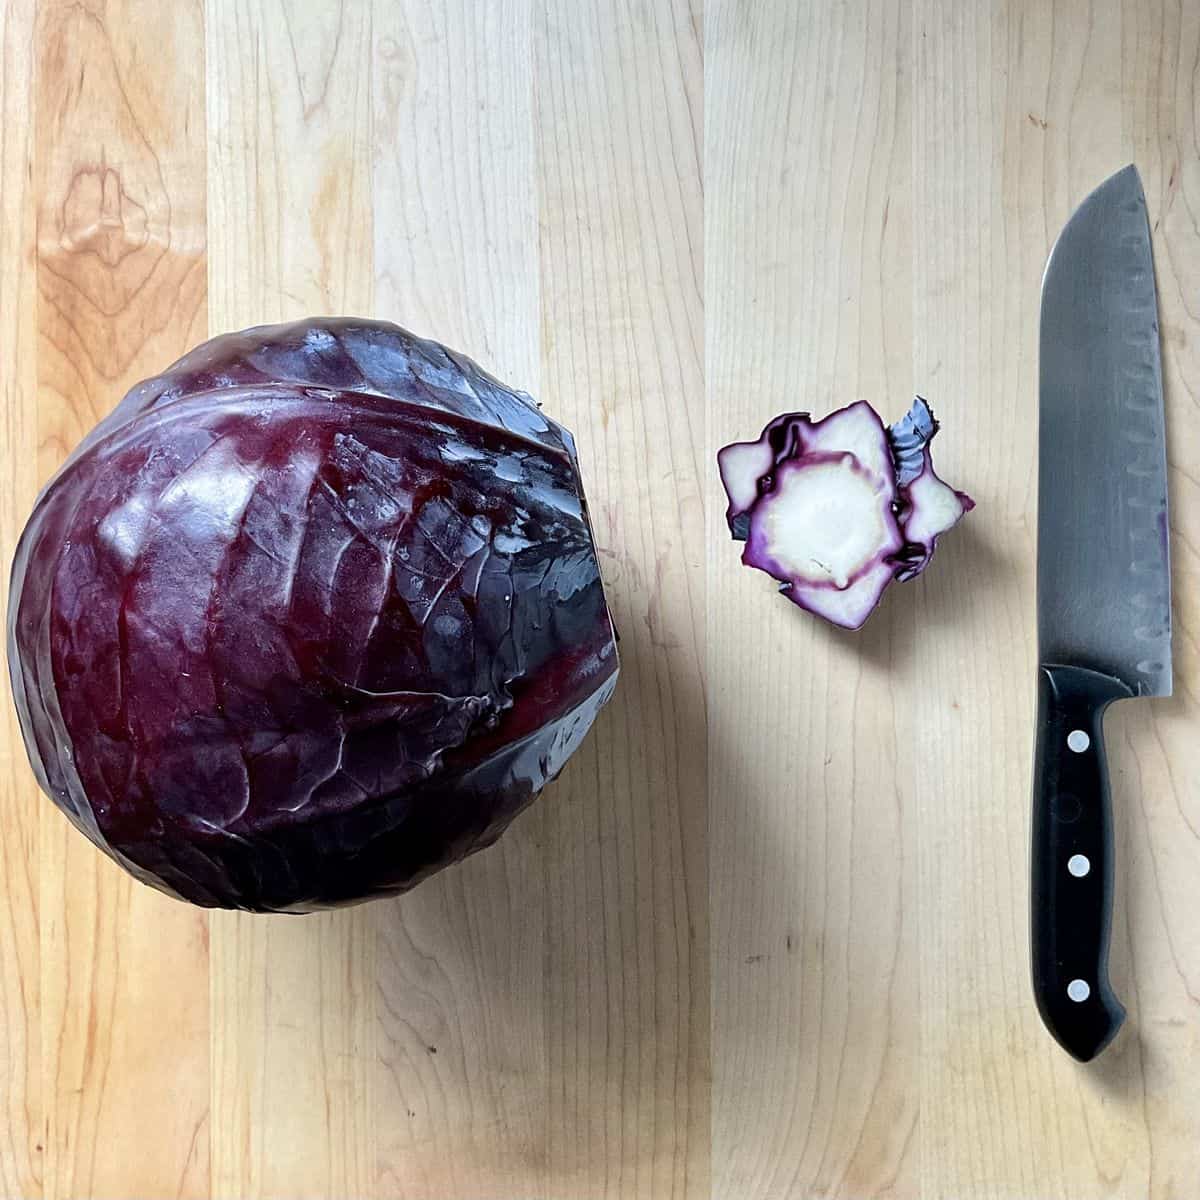 A red cabbage and its trimmed root.